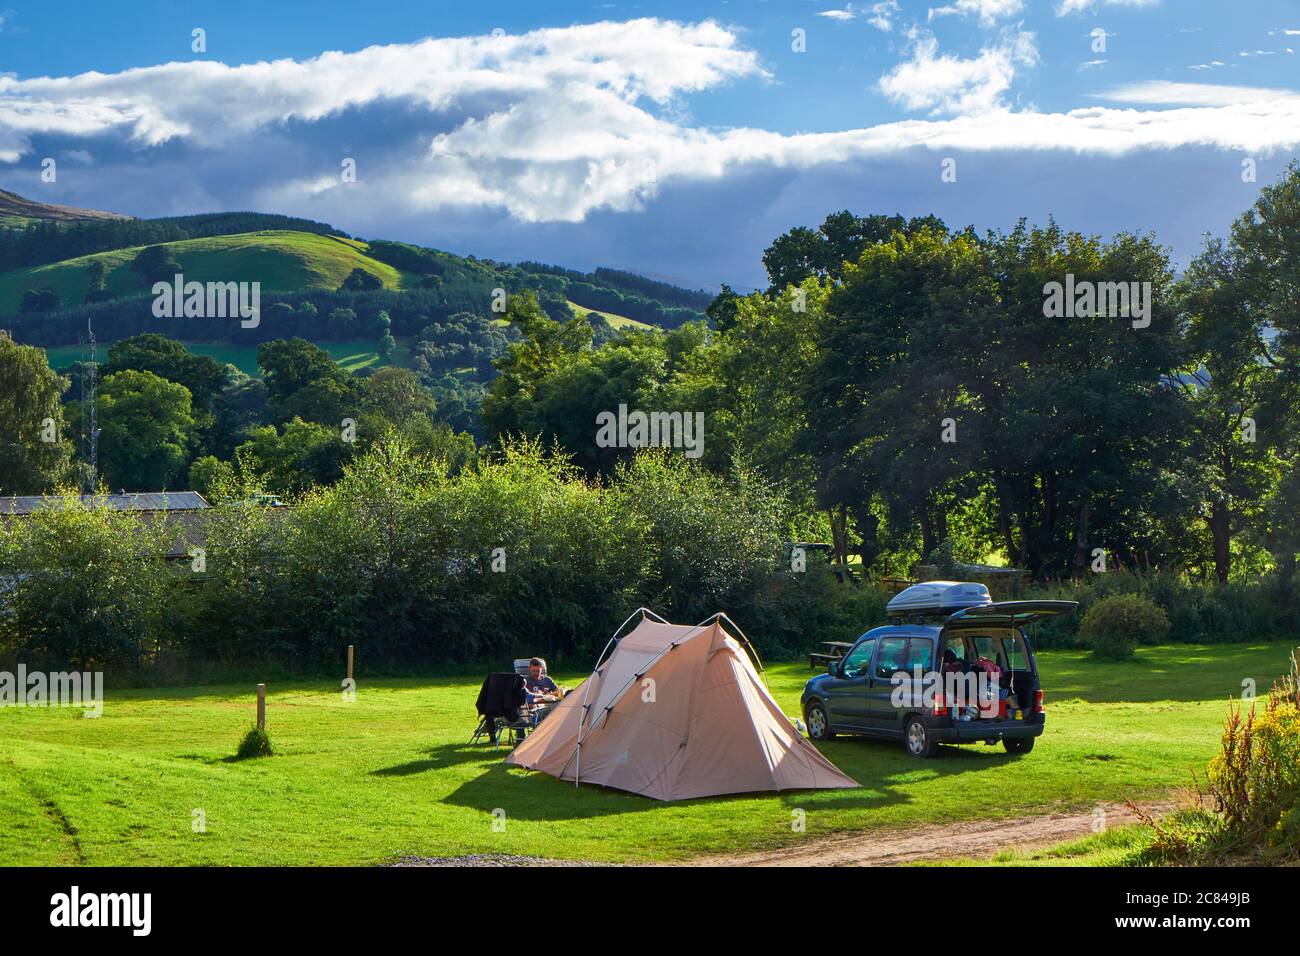 Idyllic scene with tent, tent owner and vehicle on camping plot at Glentrees campsite in the Scottish Borders Stock Photo